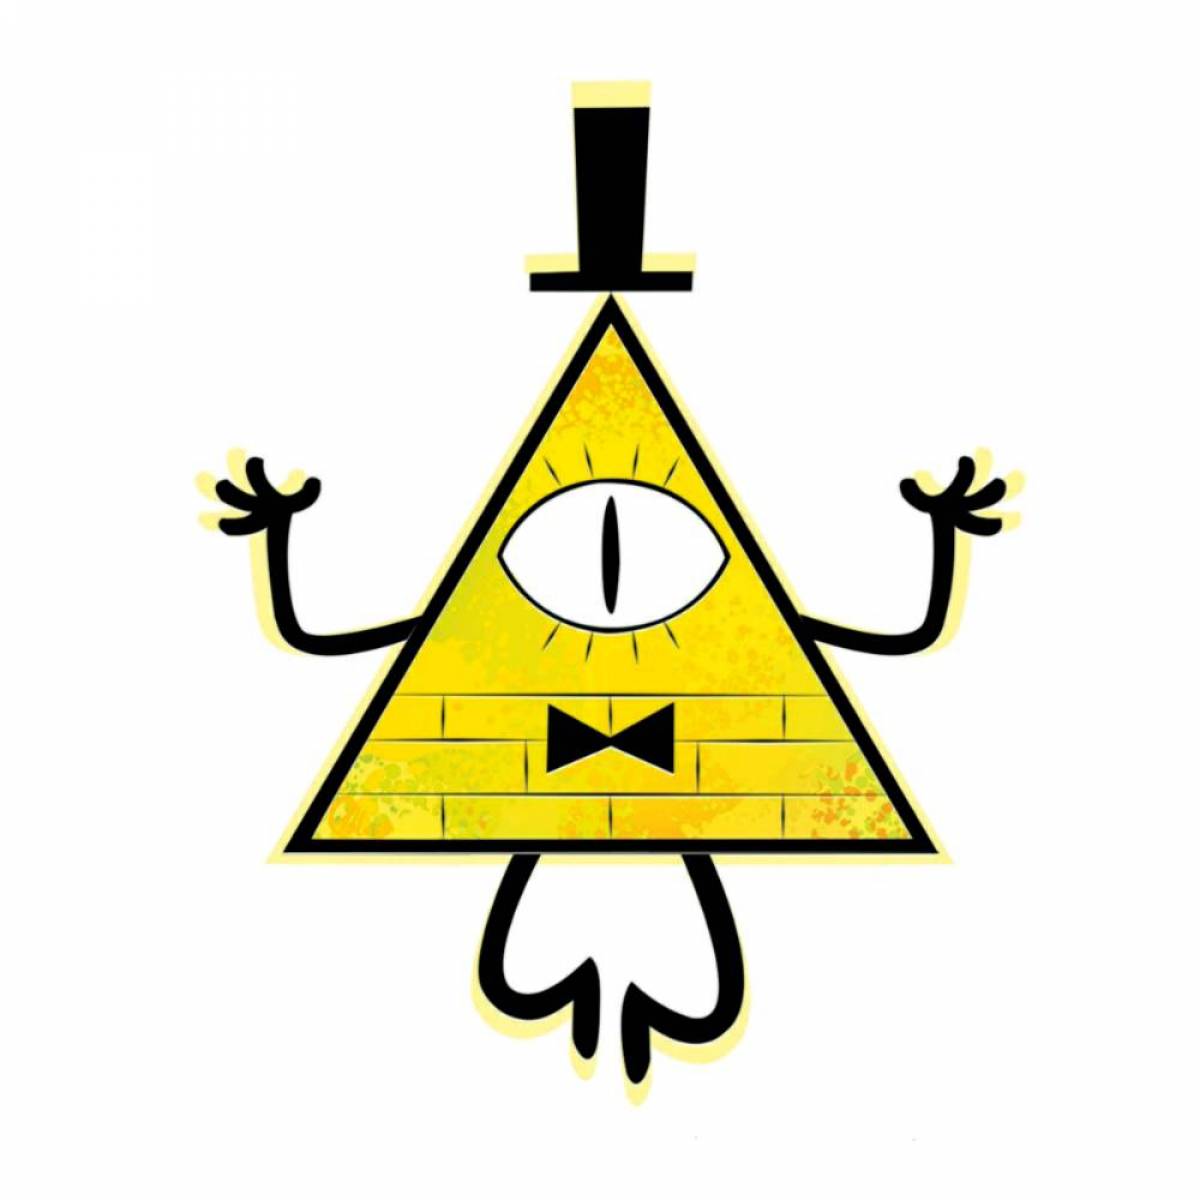 Bill cipher's shiny coloring page